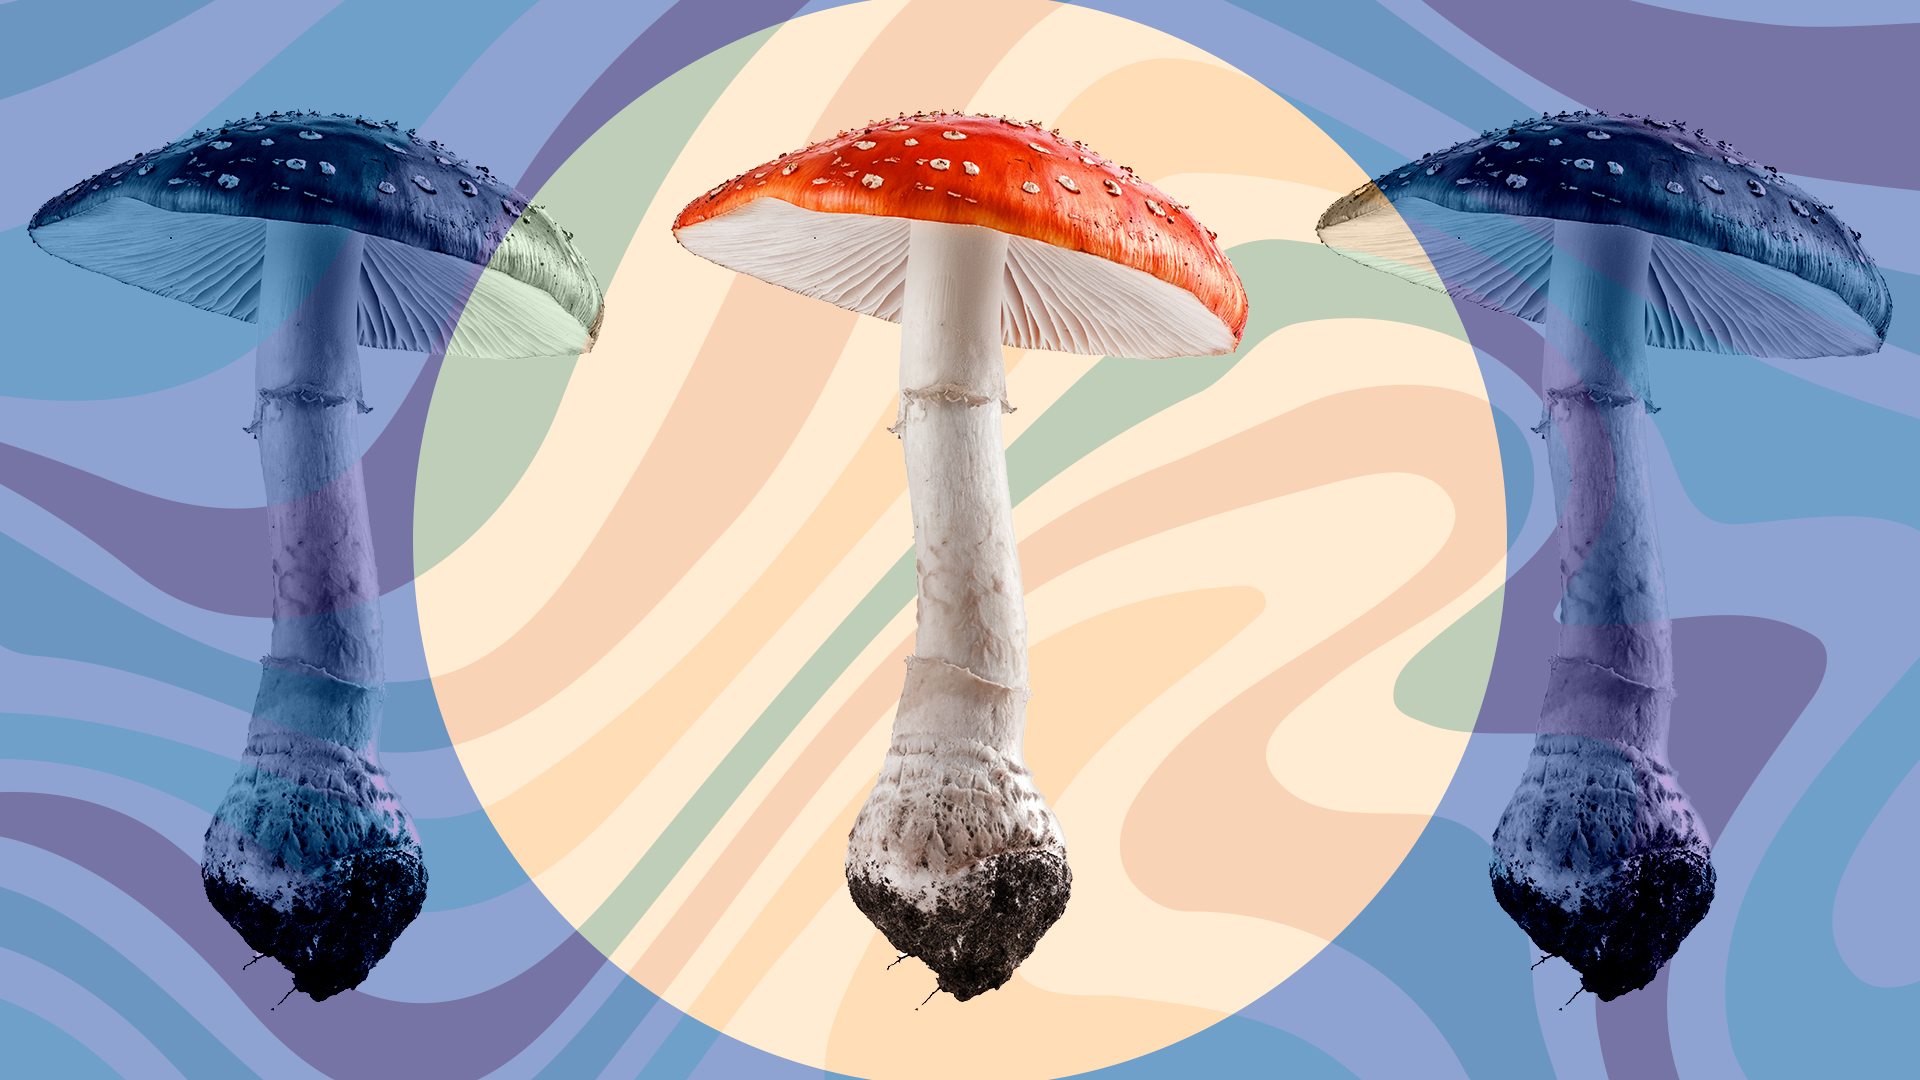 Meet amanita muscaria, the legal mind-altering mushroom for sale in Florida (and online)